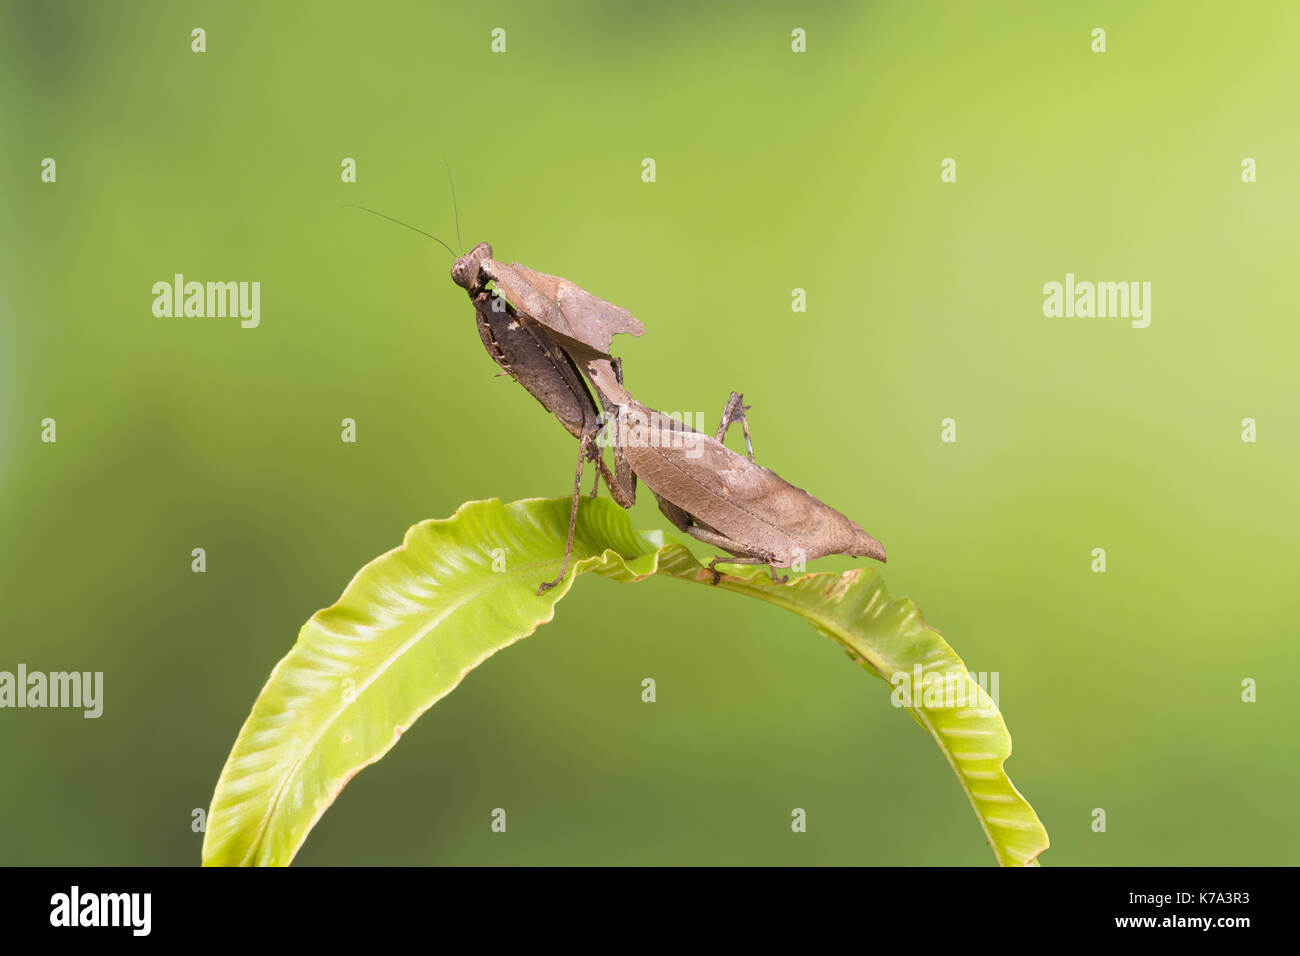 Adult specimen of a Ghost Mantis sitting on a green leaf Stock Photo